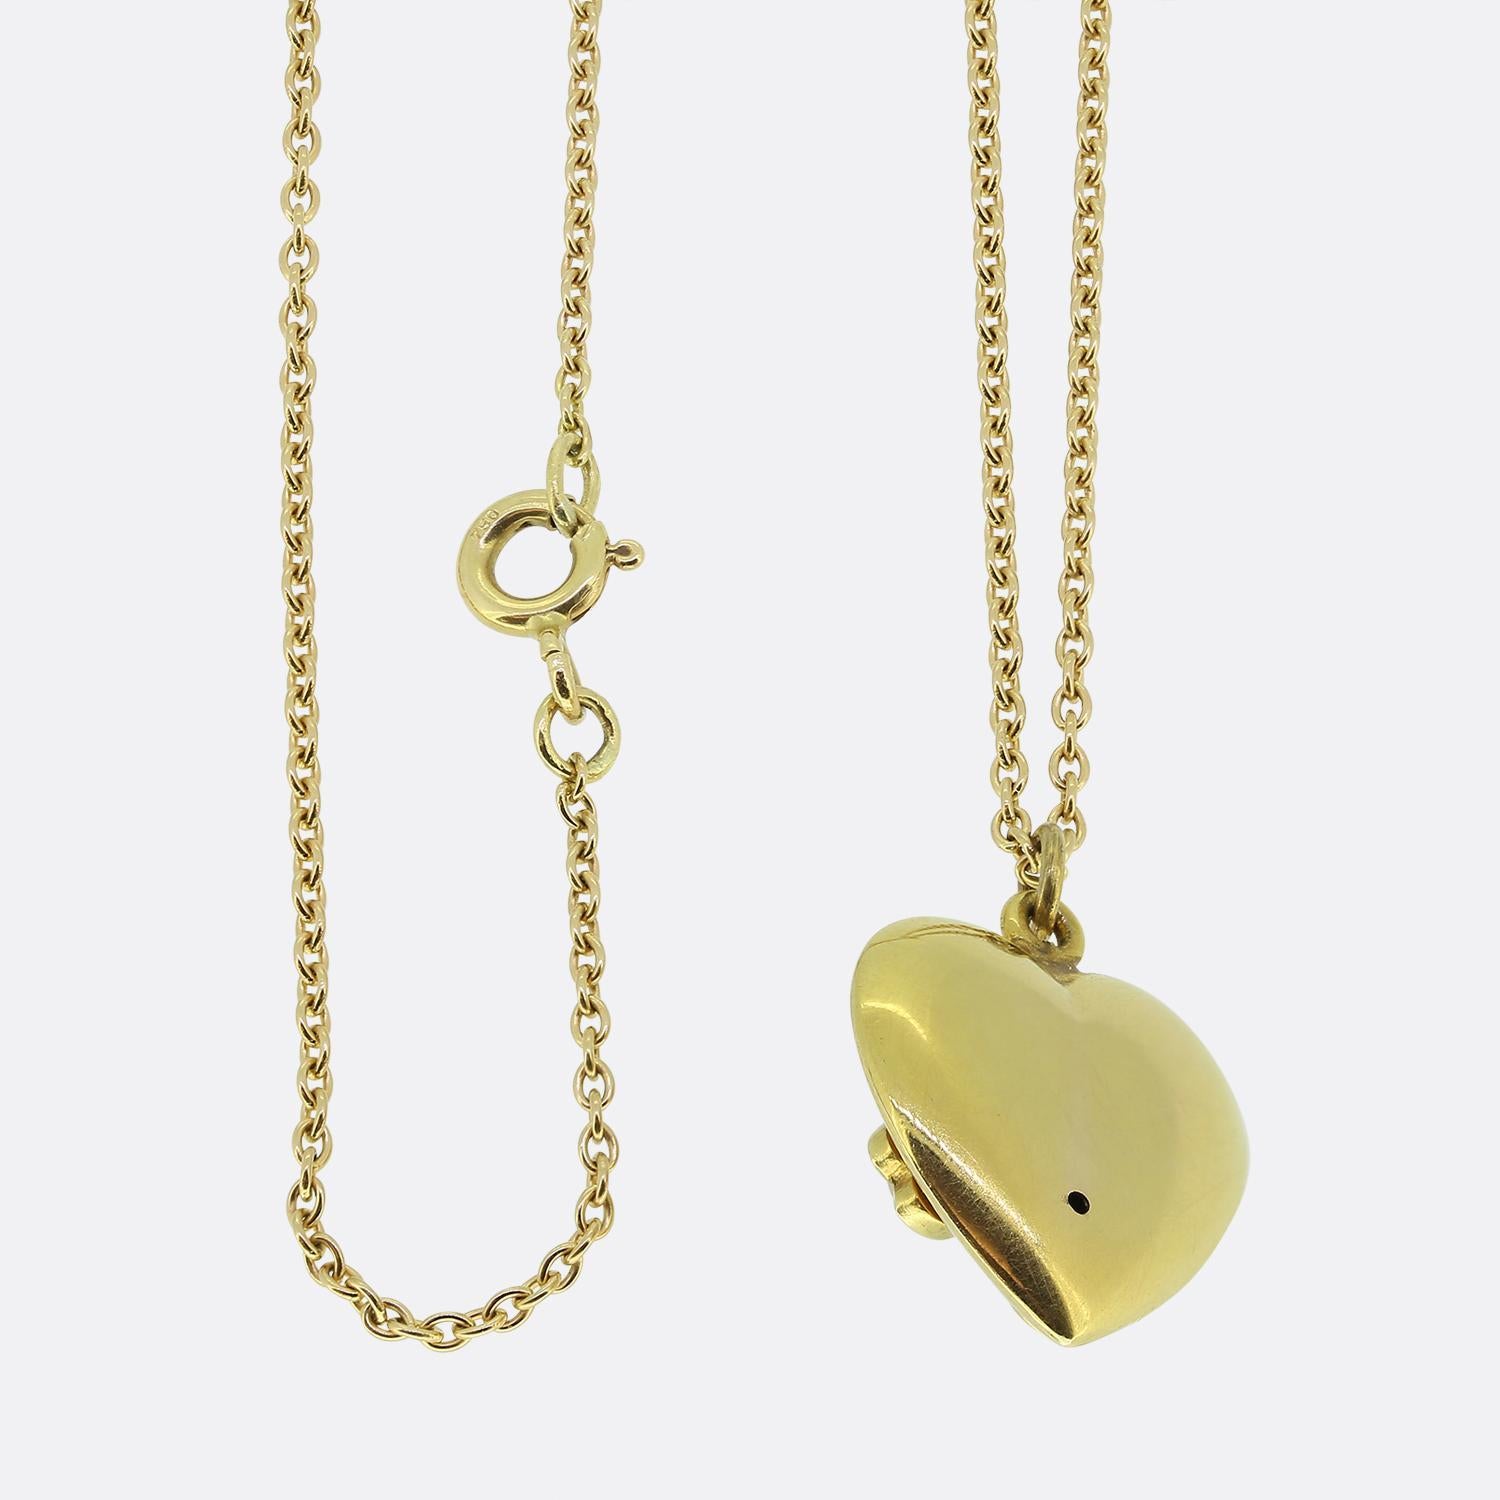 Here we have a wonderful pearl pendant necklace. This pendant has been crafted from 18ct yellow gold into the the shape of a  love heart. The piece has then been expertly set with a quartet of pearls; three of which mimic the petals of a clover